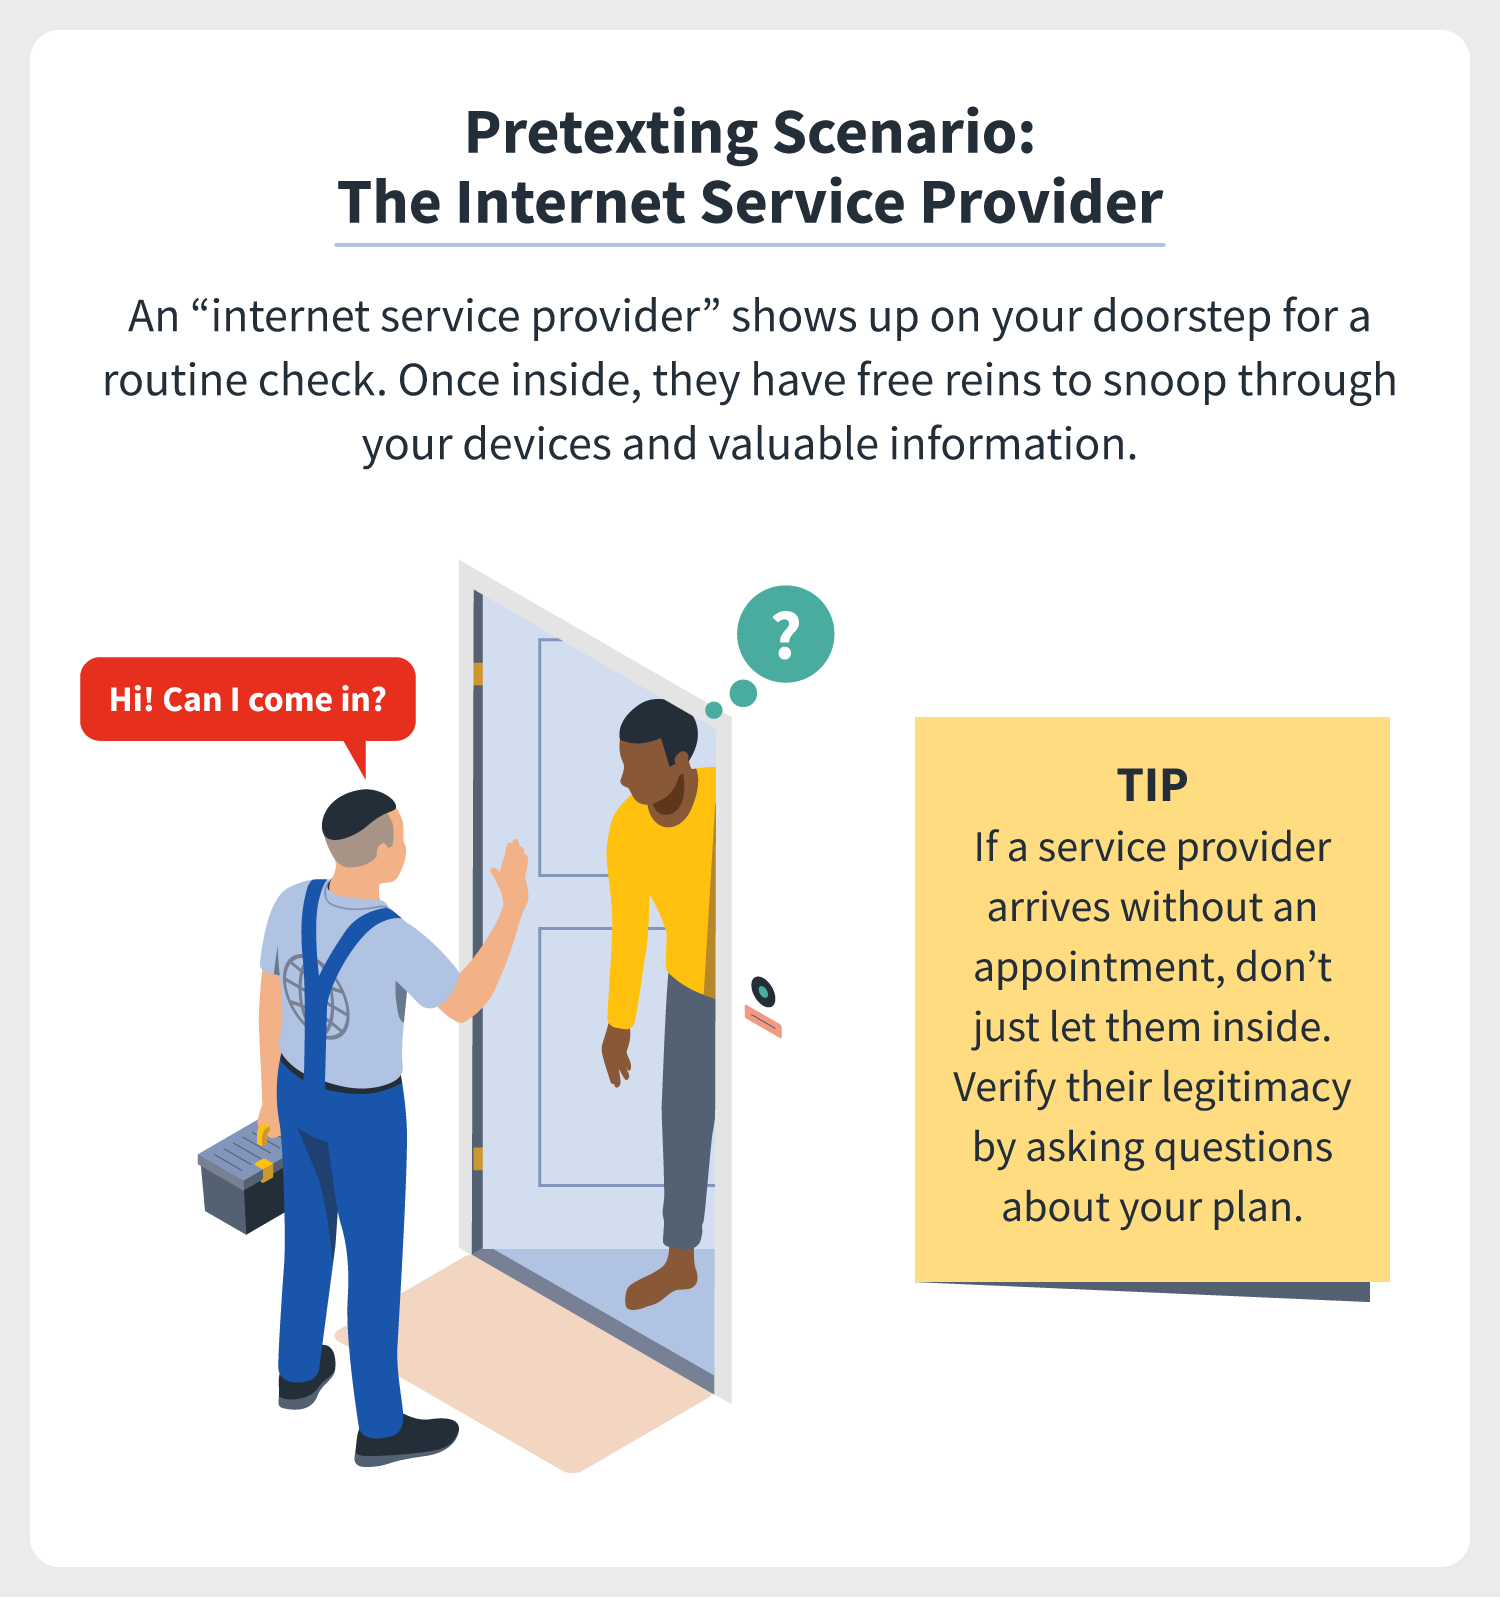 An “internet service provider” shows up on your doorstep for a routine check. Once inside, they have free reins to snoop through your devices. Tip: If a service provider arrives without an appointment, don’t just let them inside. Verify their legitimacy. 